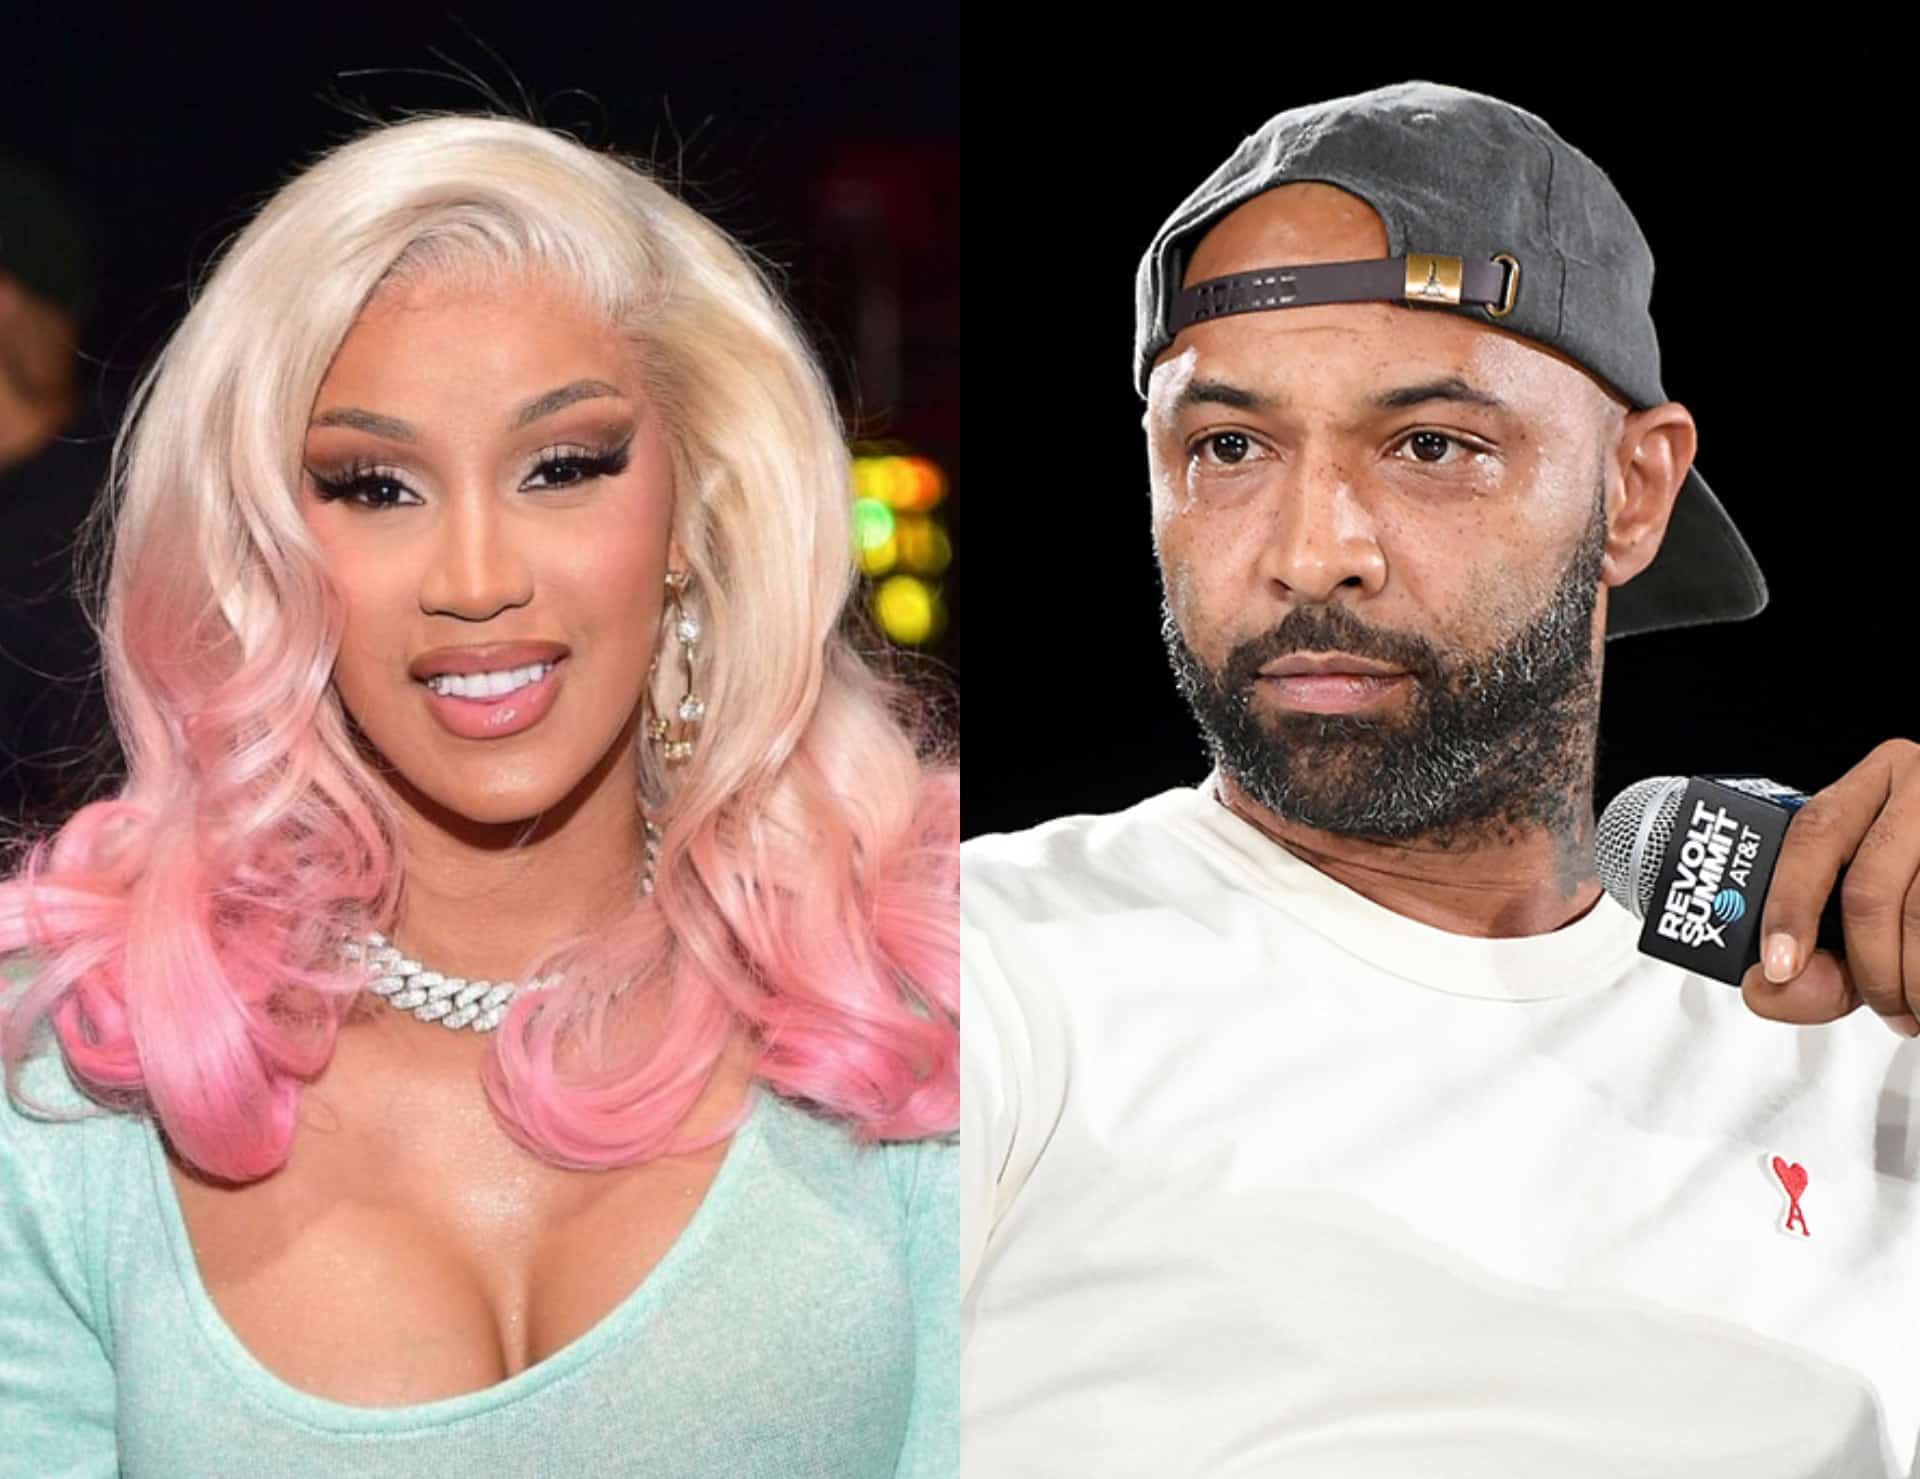 Joe Budden Says Cardi B Is Scared To Drop An Album The Girl Rapper Wave Is Over